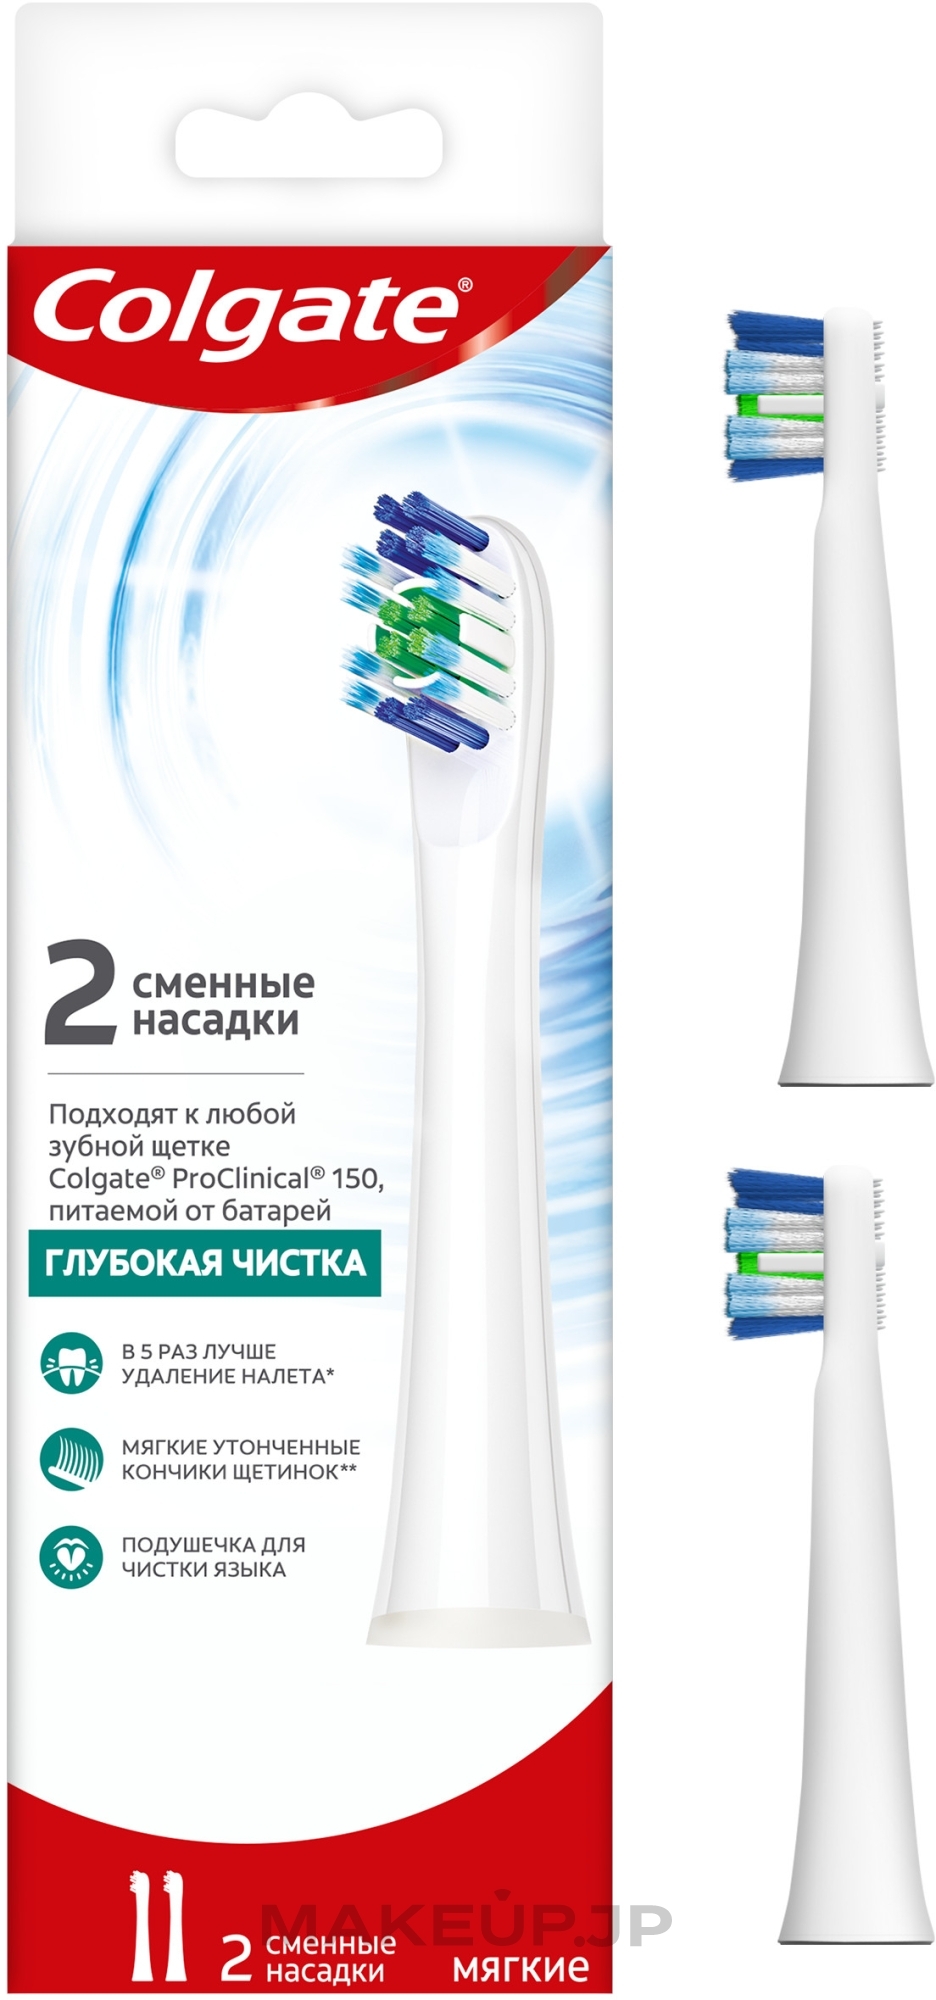 Electric Toothbrush Heads "Deep Clean", soft - Colgate ProClinical 150 — photo 2 szt.